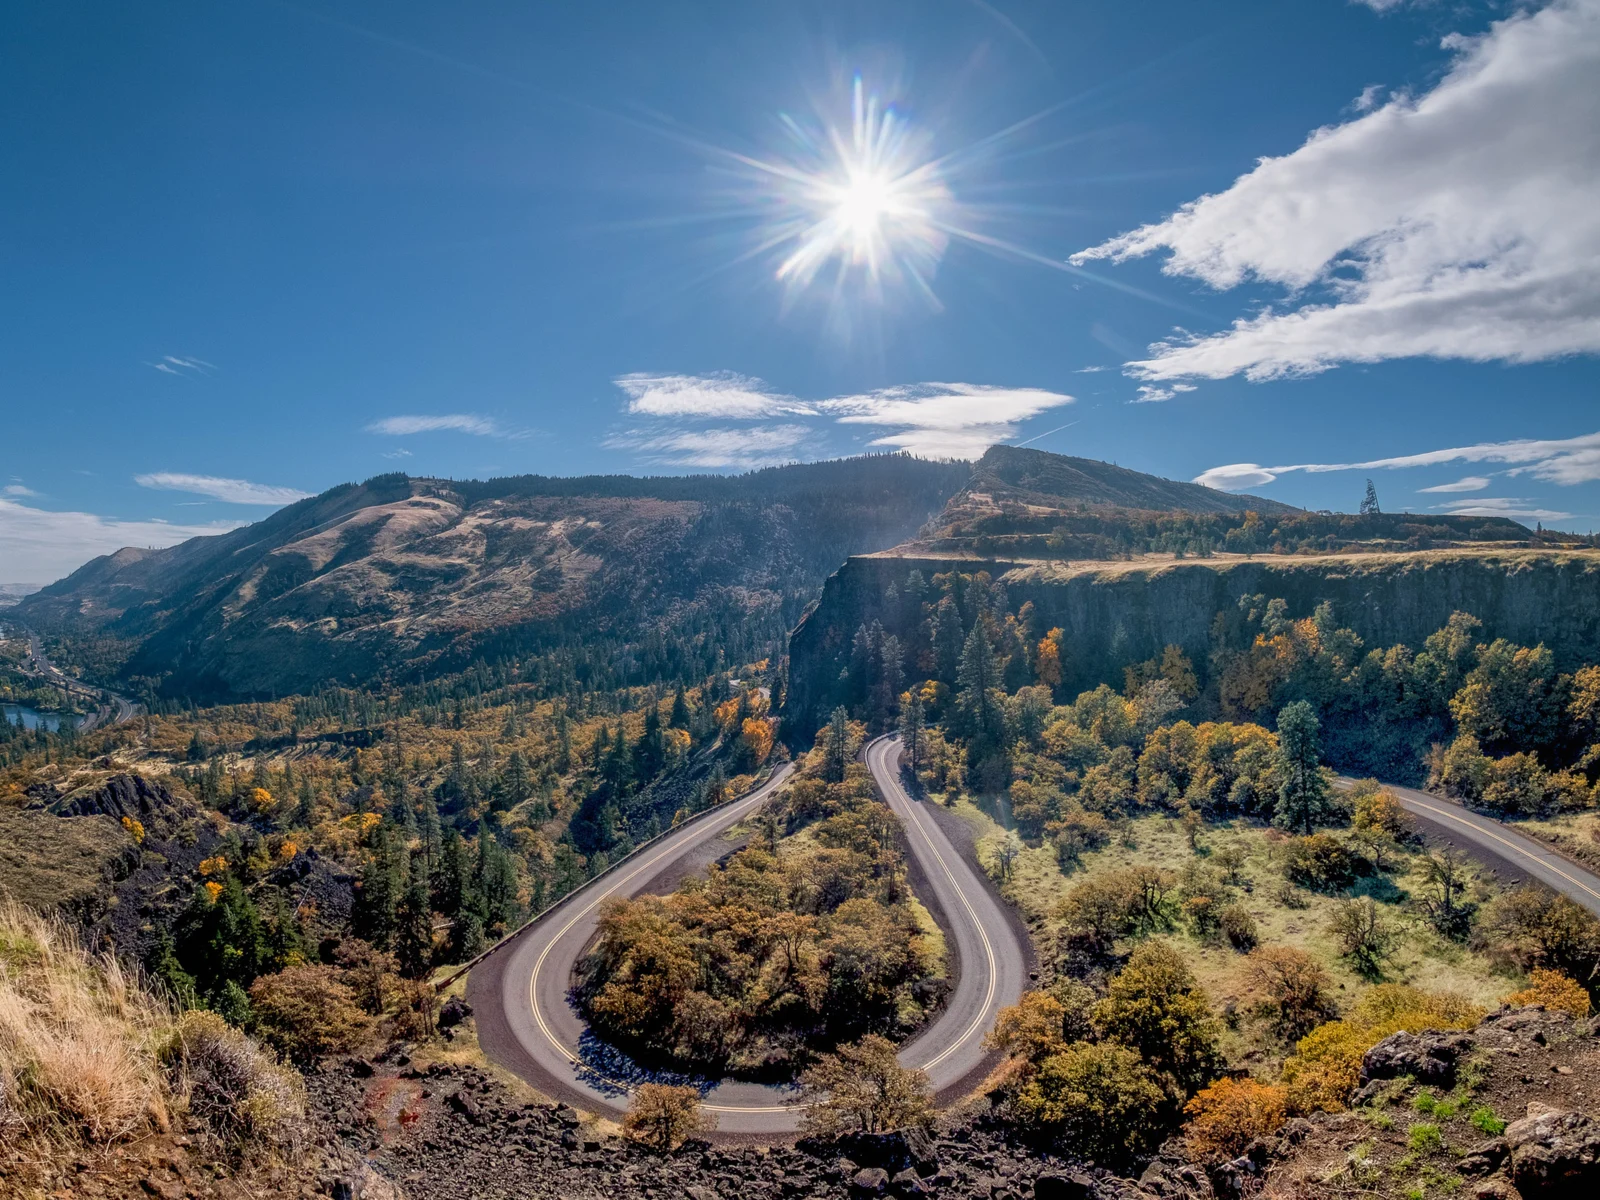 Beautiful day in one of Oregon's best places to visit, the Columbia River Gorge, with a winding road through the treeline